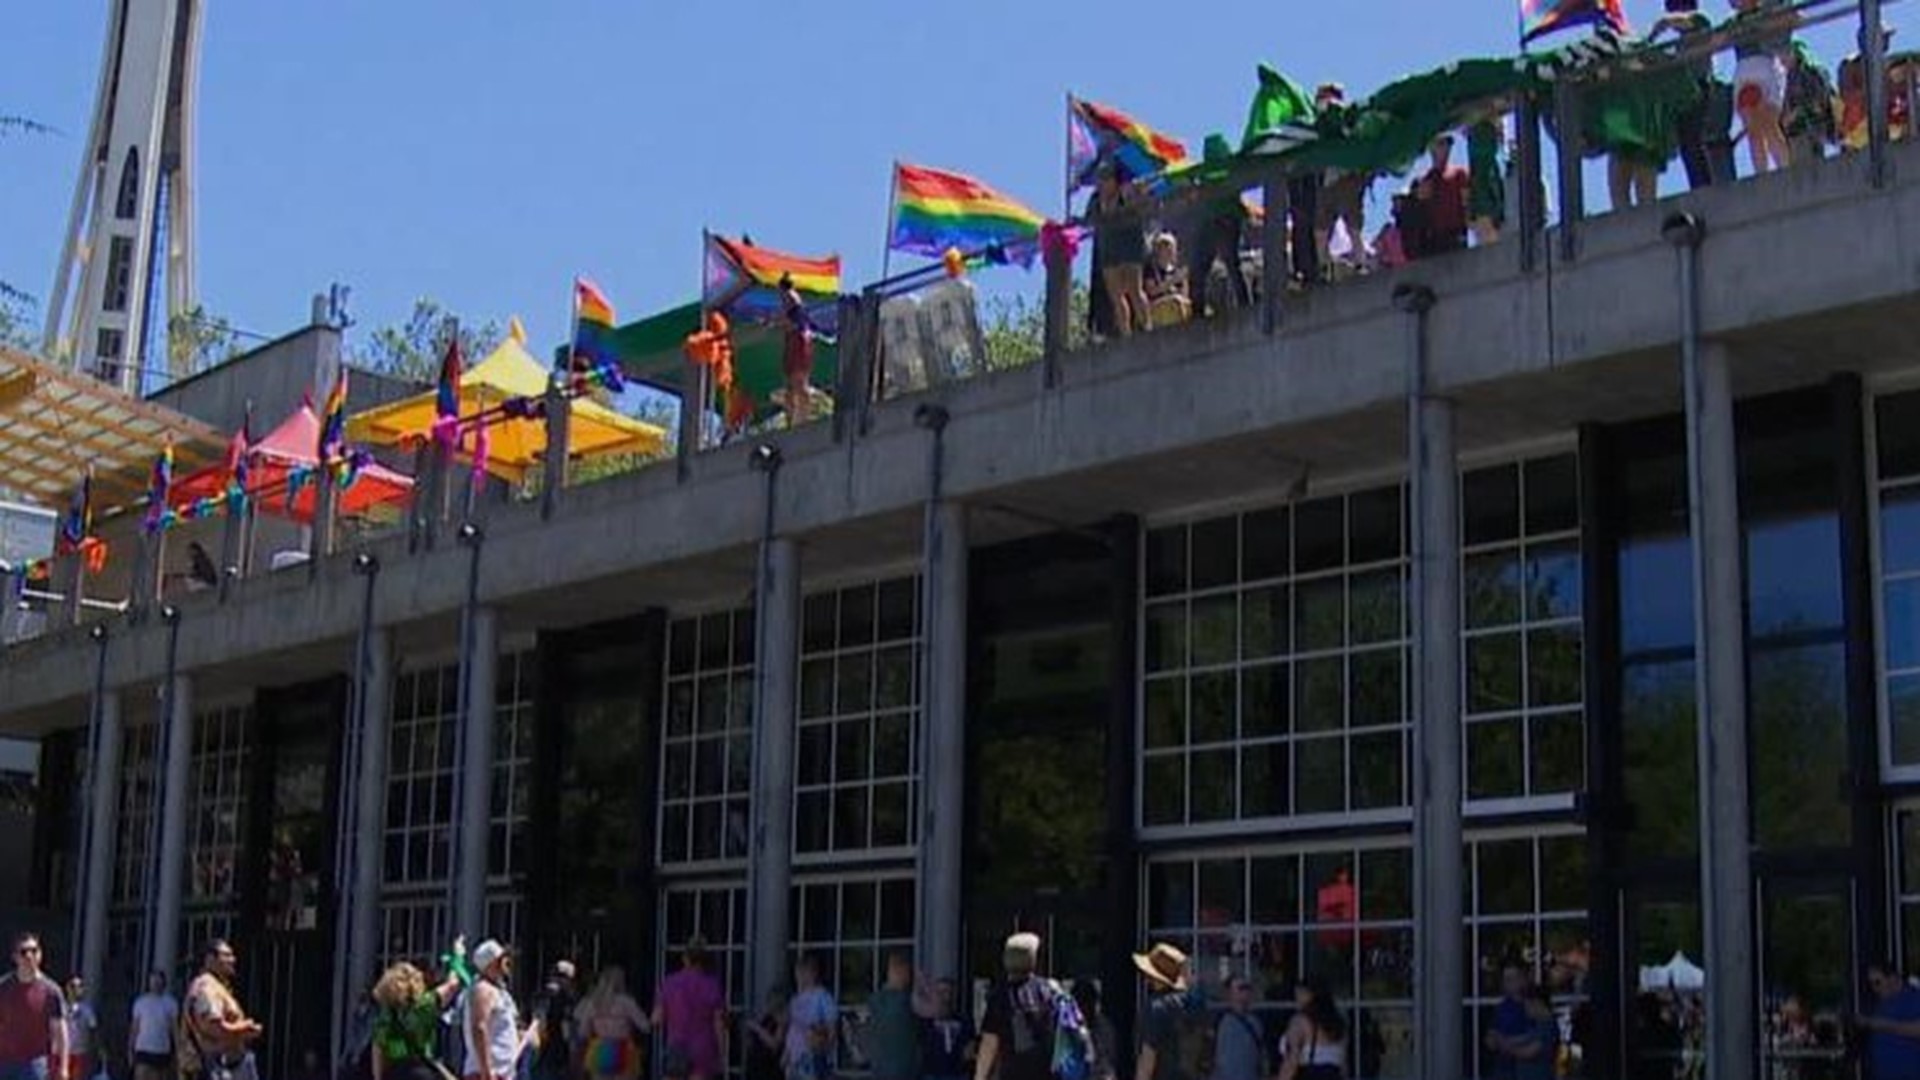 The Supreme Court's decision to overturn Roe v. Wade made an impact at Seattle Pride's first parade in three years.